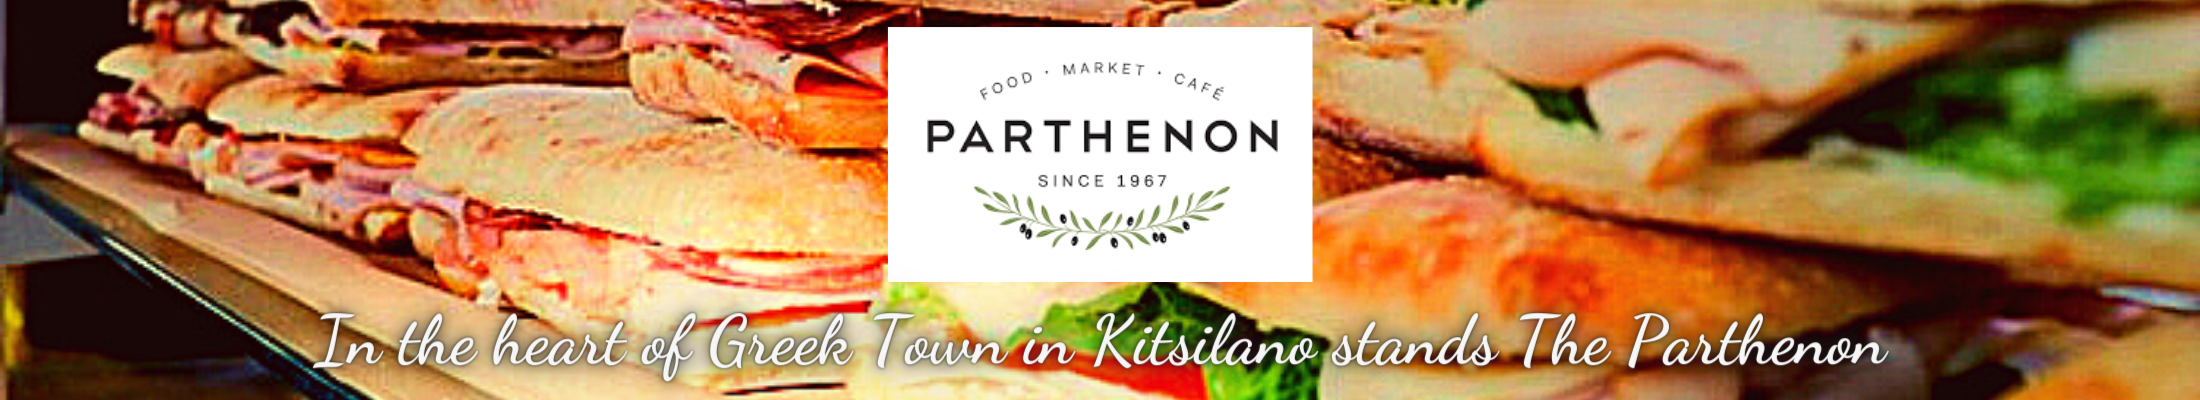 Parthenon Market in Partnership with Euro Fine Foods